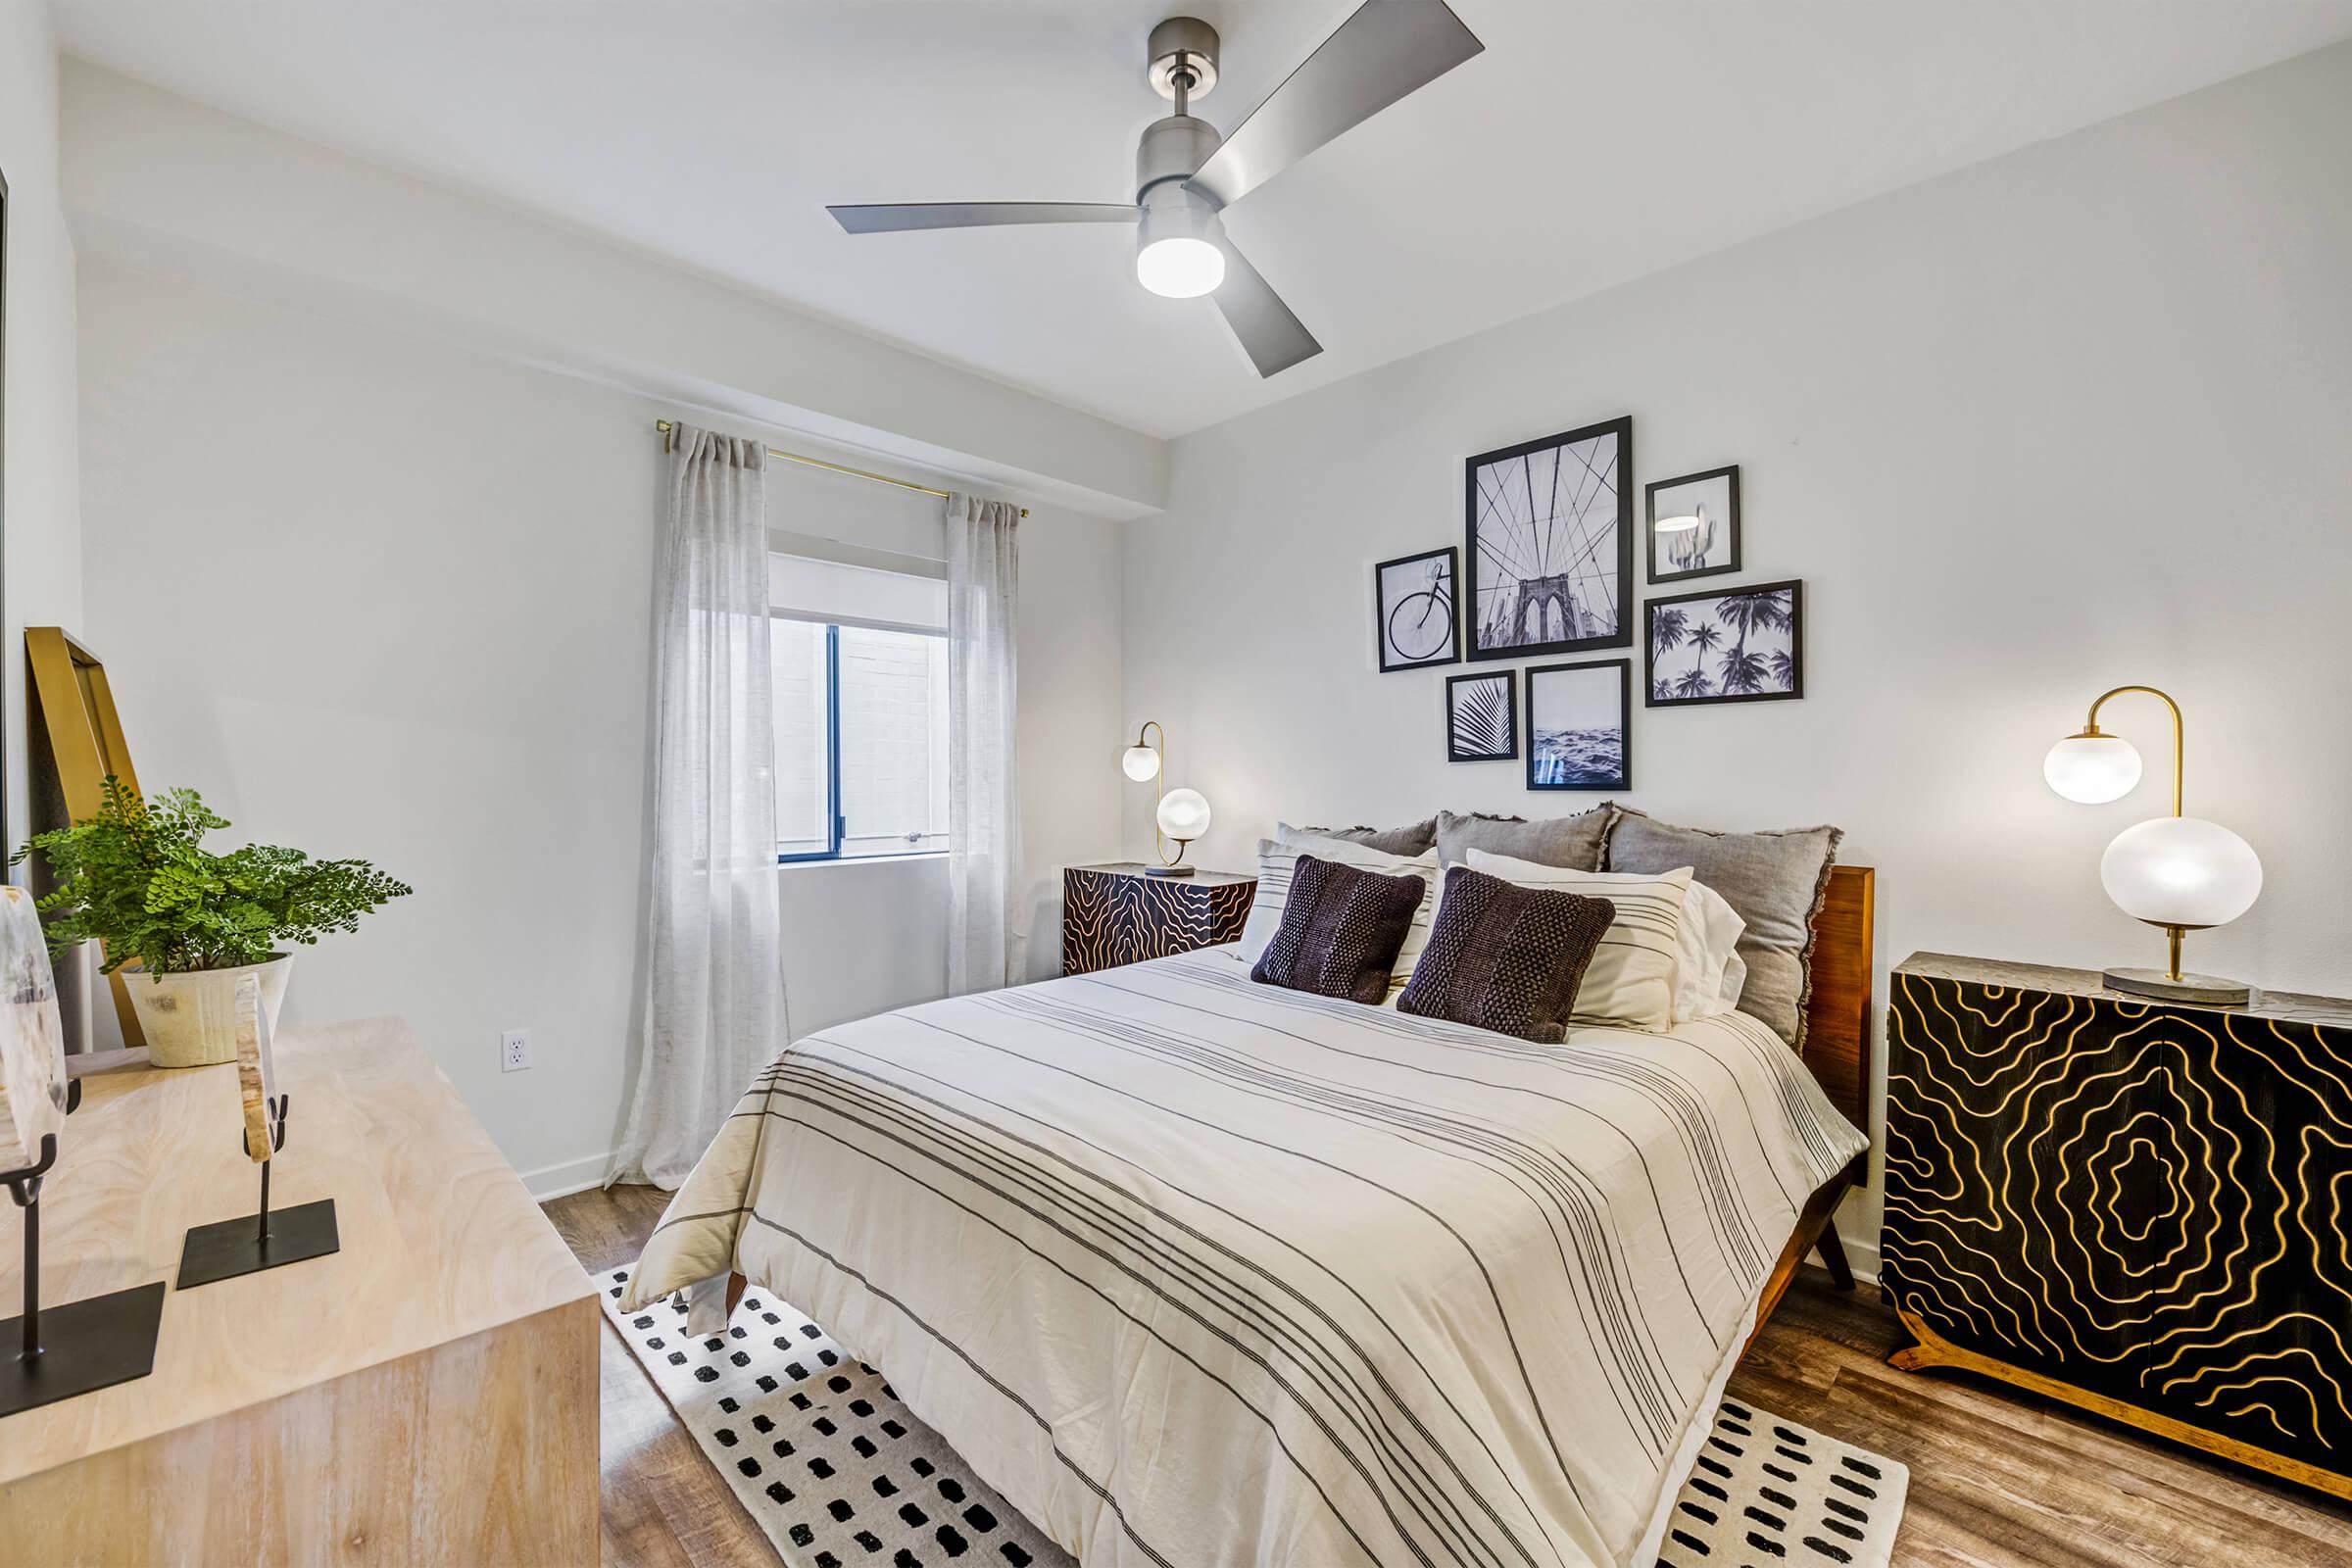 Ceiling fans are featured in each bedroom